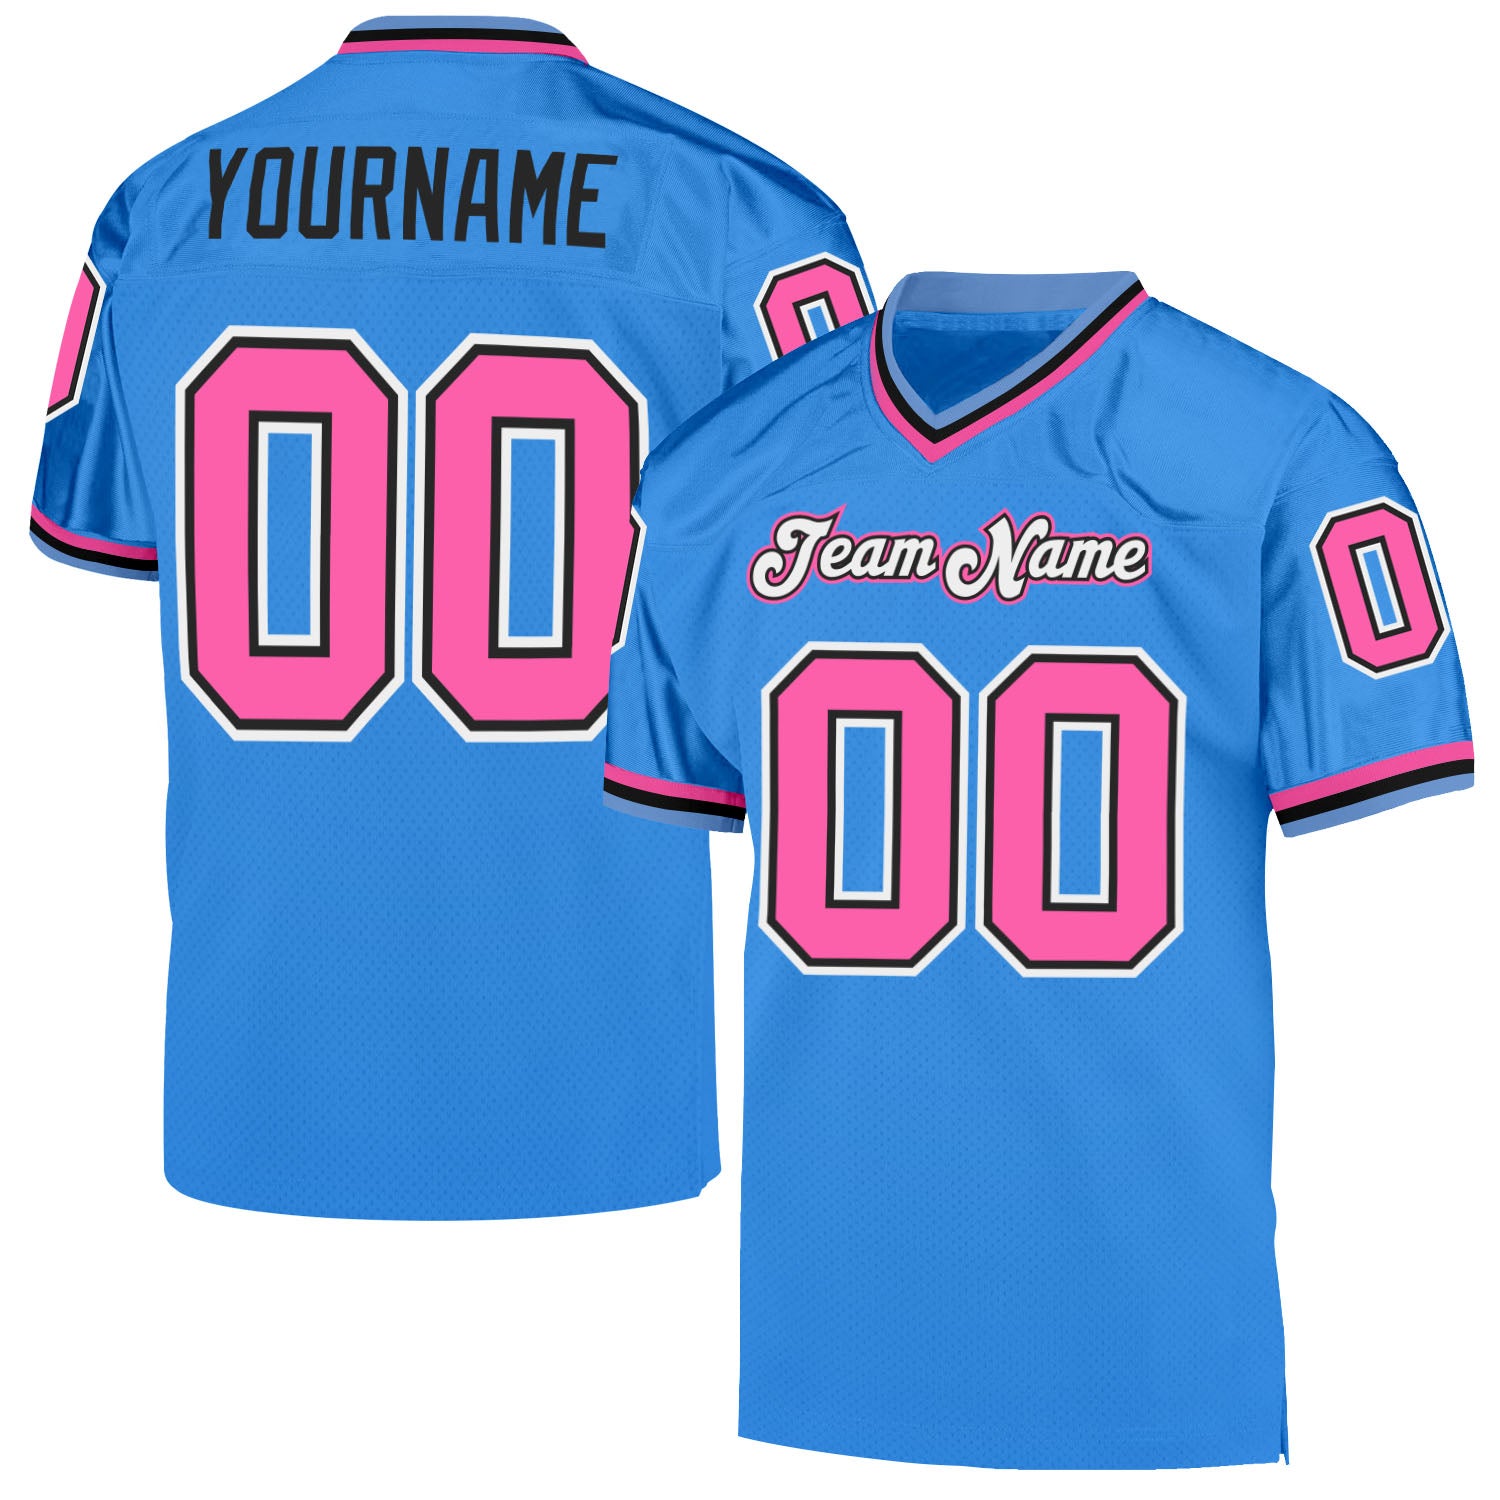 Custom Grass Green Pink-White Mesh Authentic Football Jersey Men's Size:L